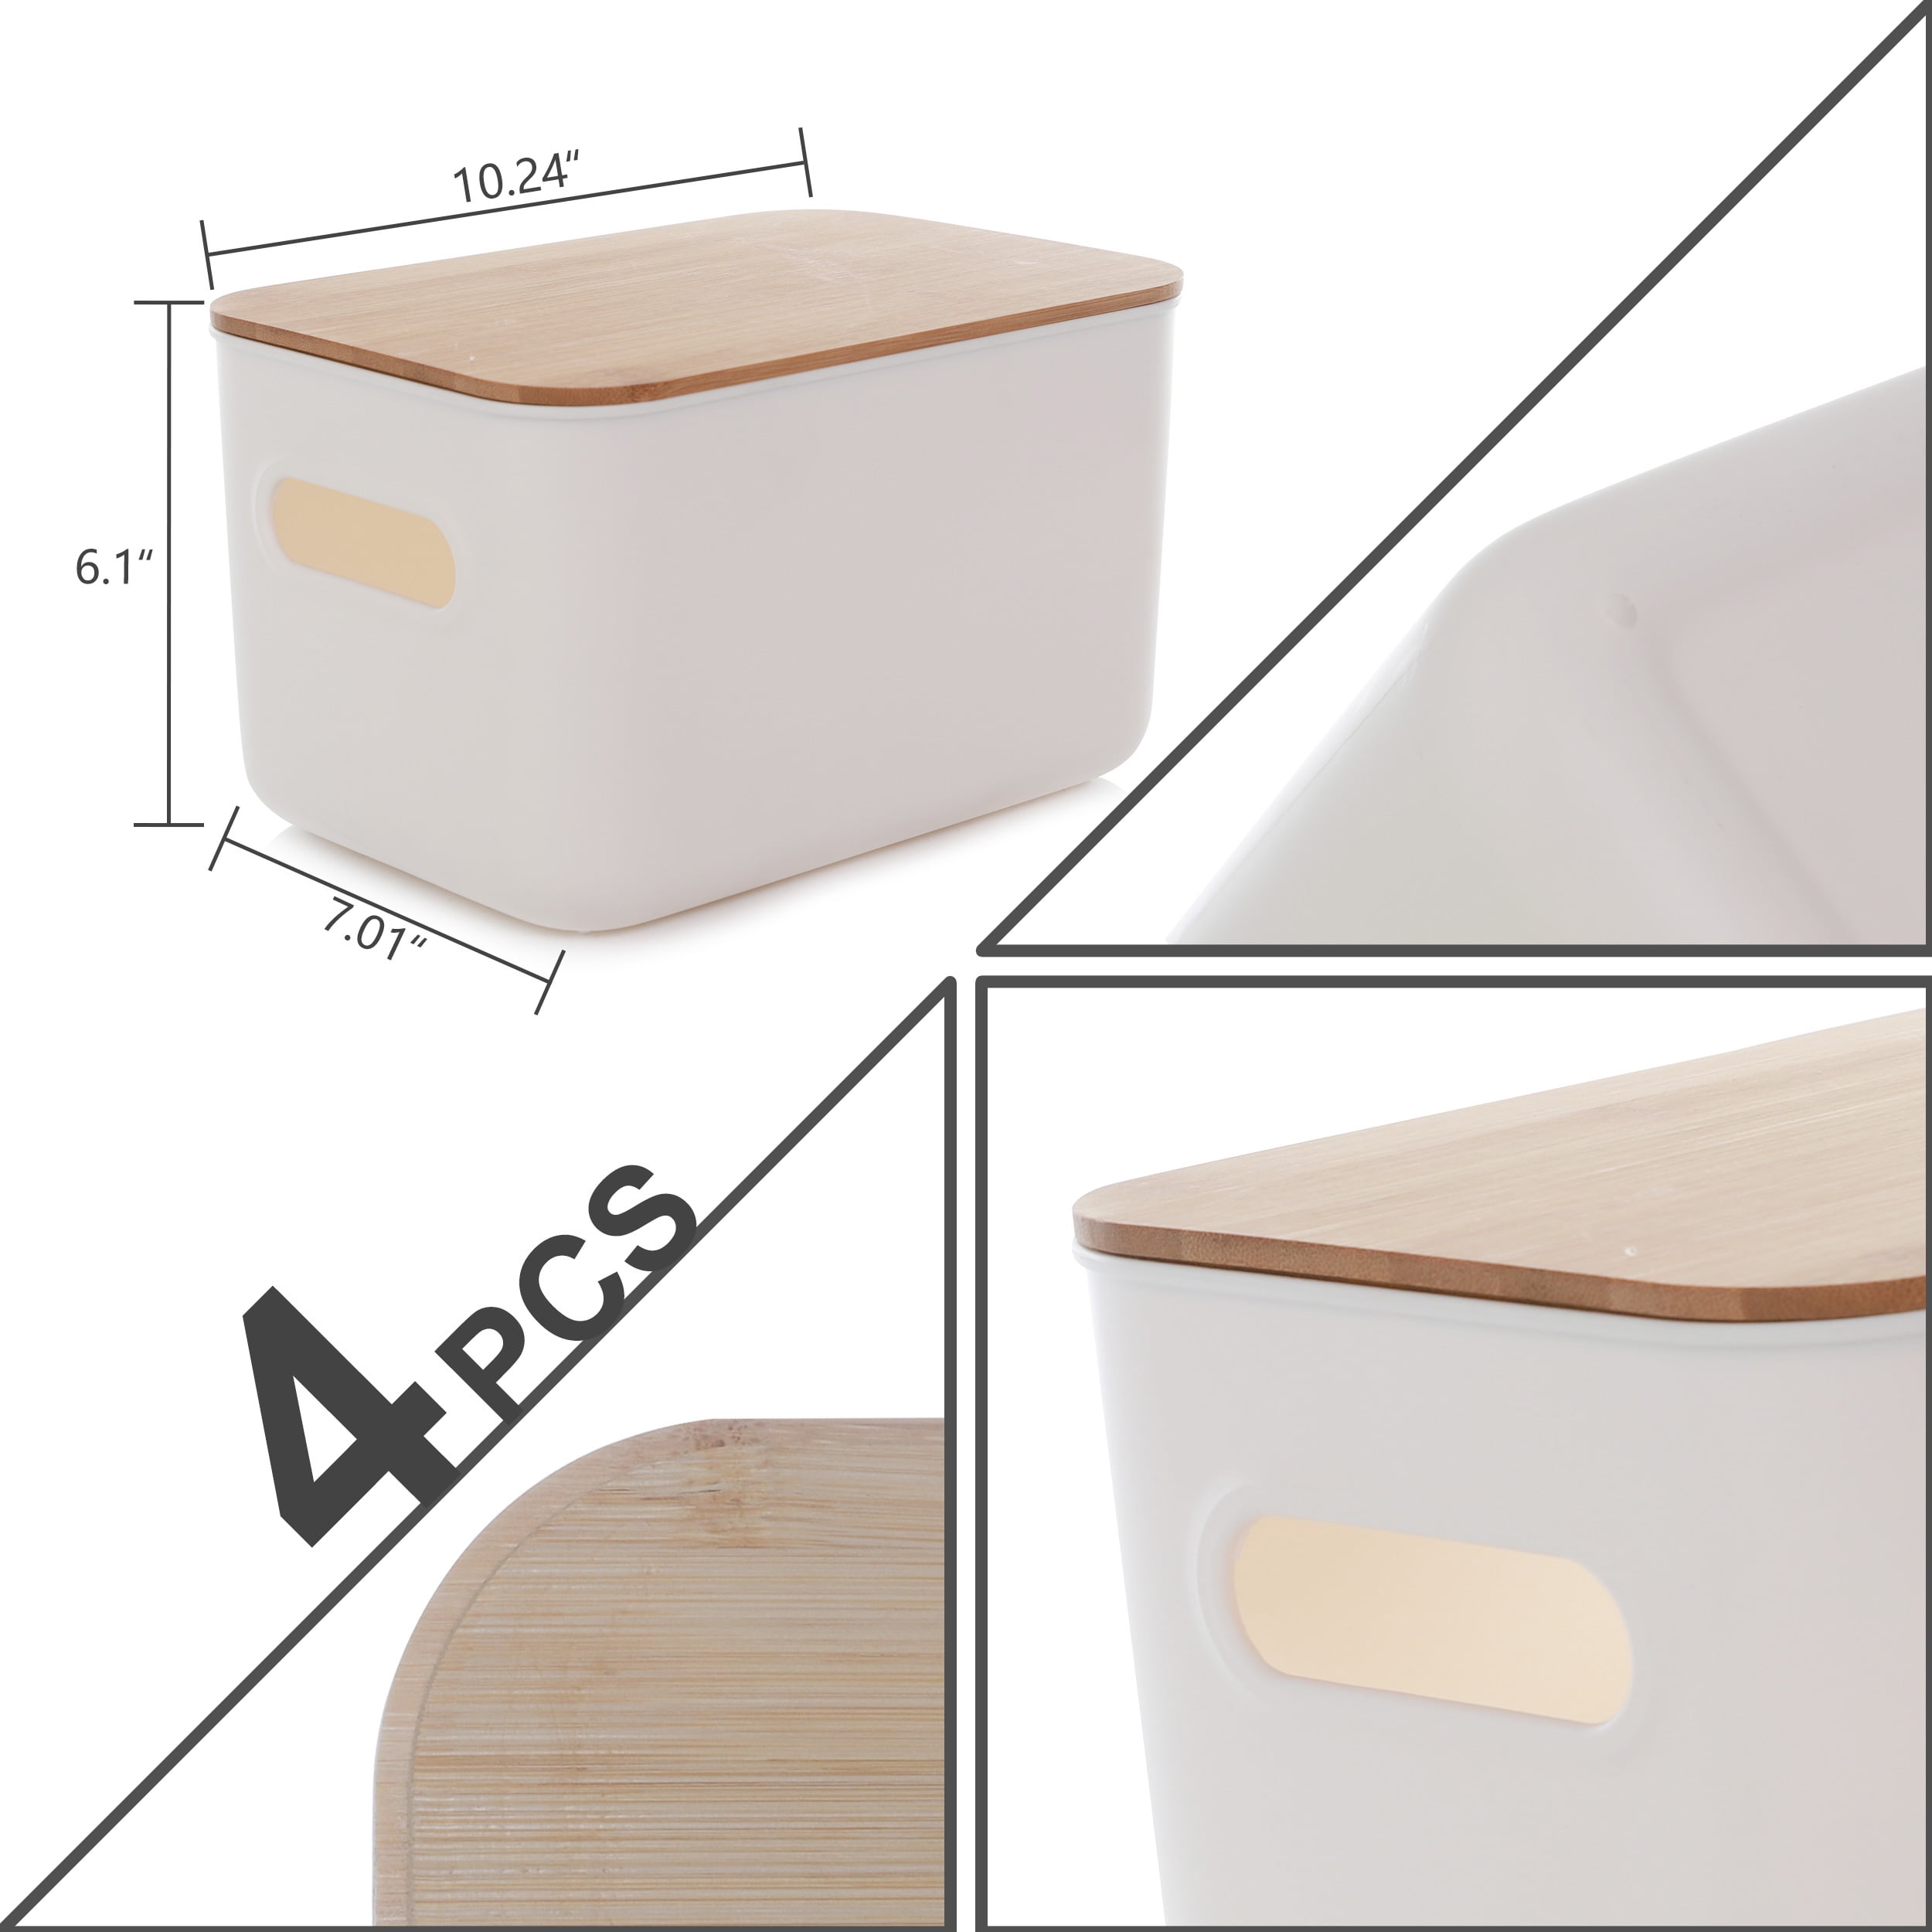  Citylife 4 PCS Storage Bins with Bamboo Lids Plastic Storage  Containers for Organizing Stackable Storage Box with Handle, 10.23 x 7.08 x  6.3 inch